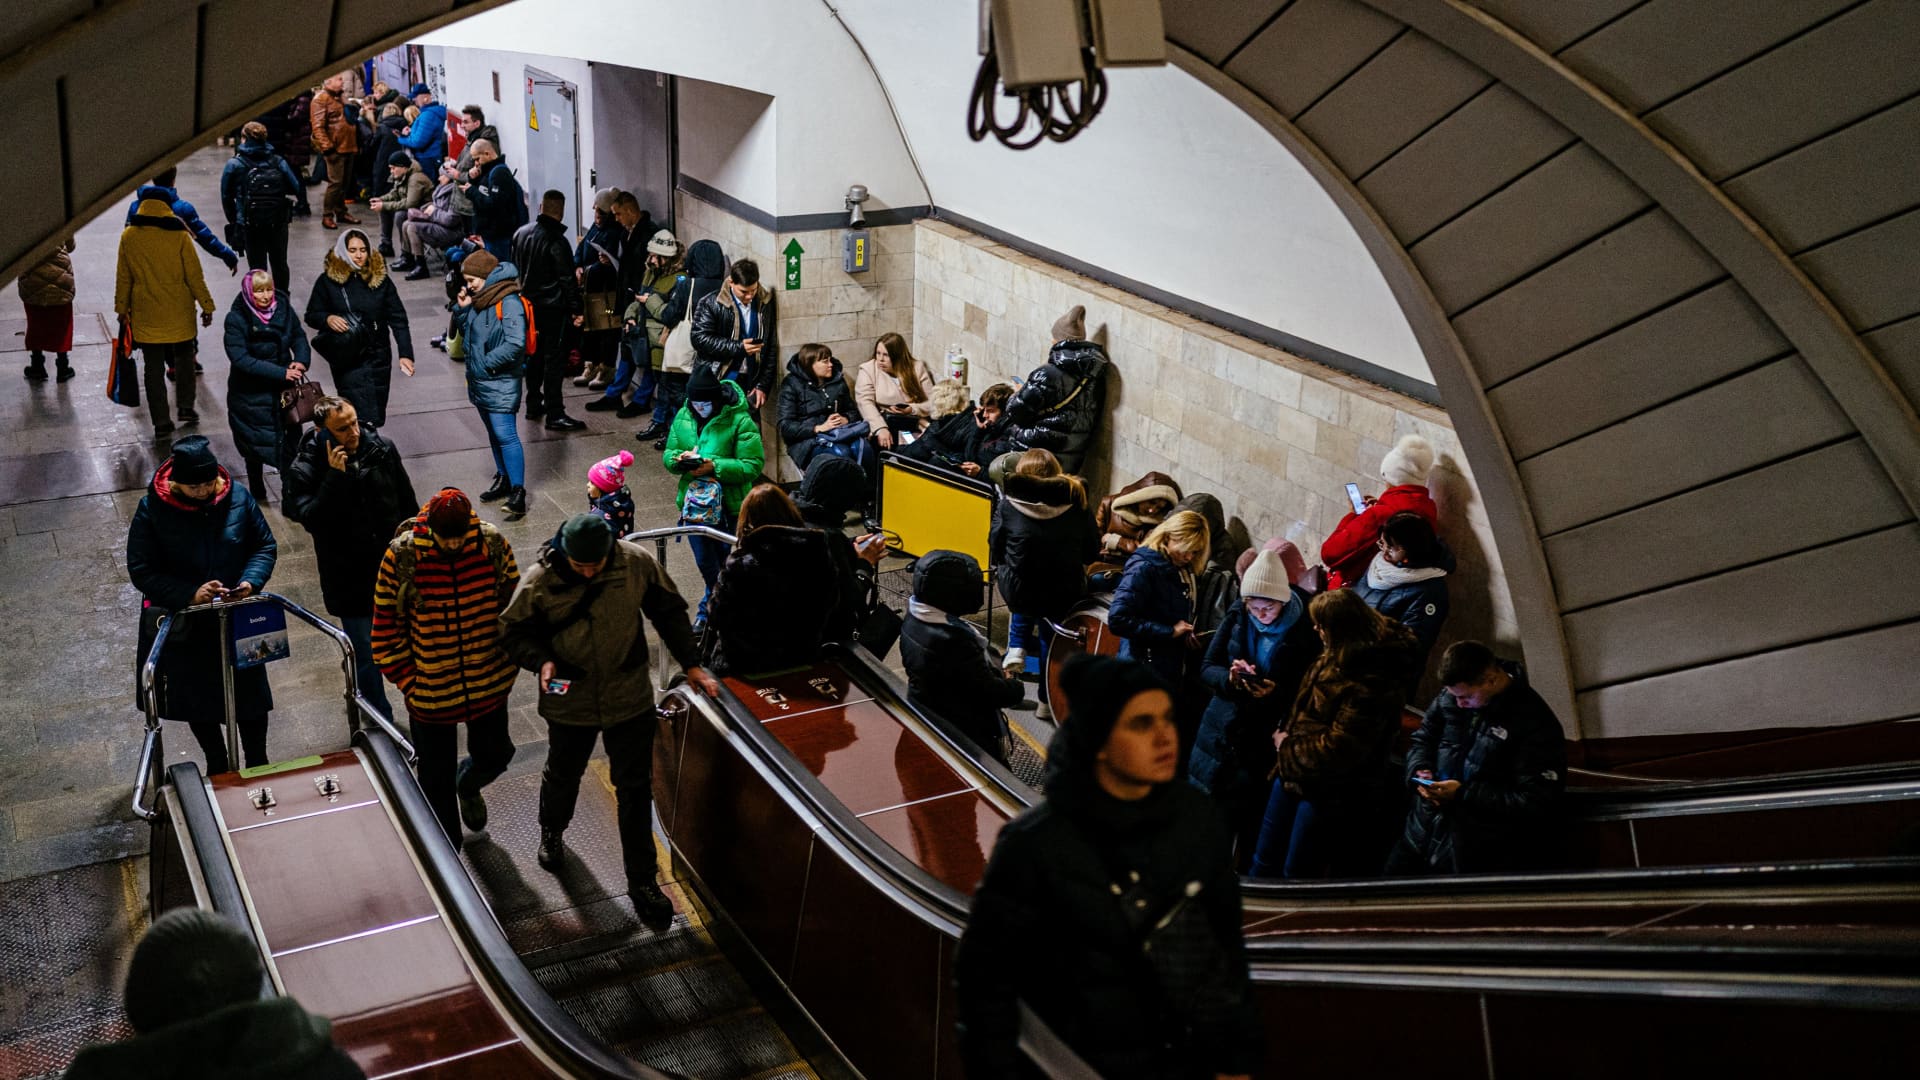 Civilians take shelter inside a metro station during air raid alert in the centre of Kyiv on December 13, 2022, amid the Russian invasion of Ukraine.